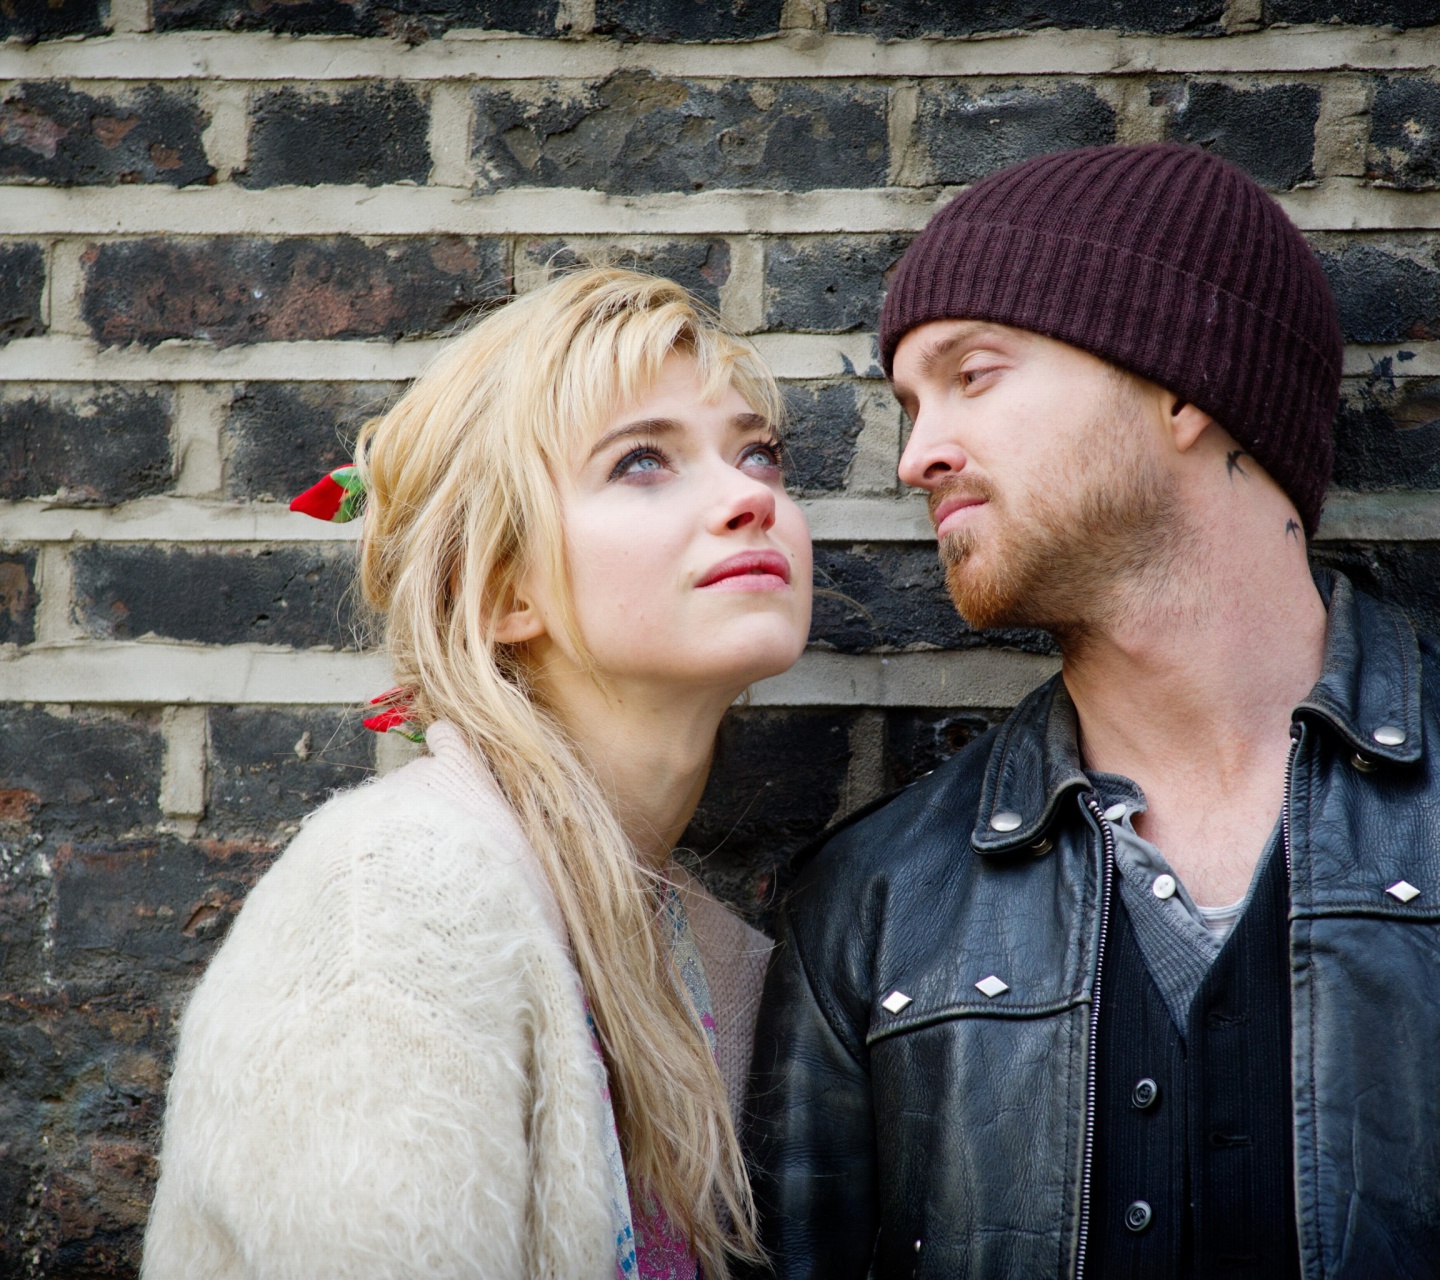 Das A Long Way Down with Aaron Paul and Imogen Poots Wallpaper 1440x1280